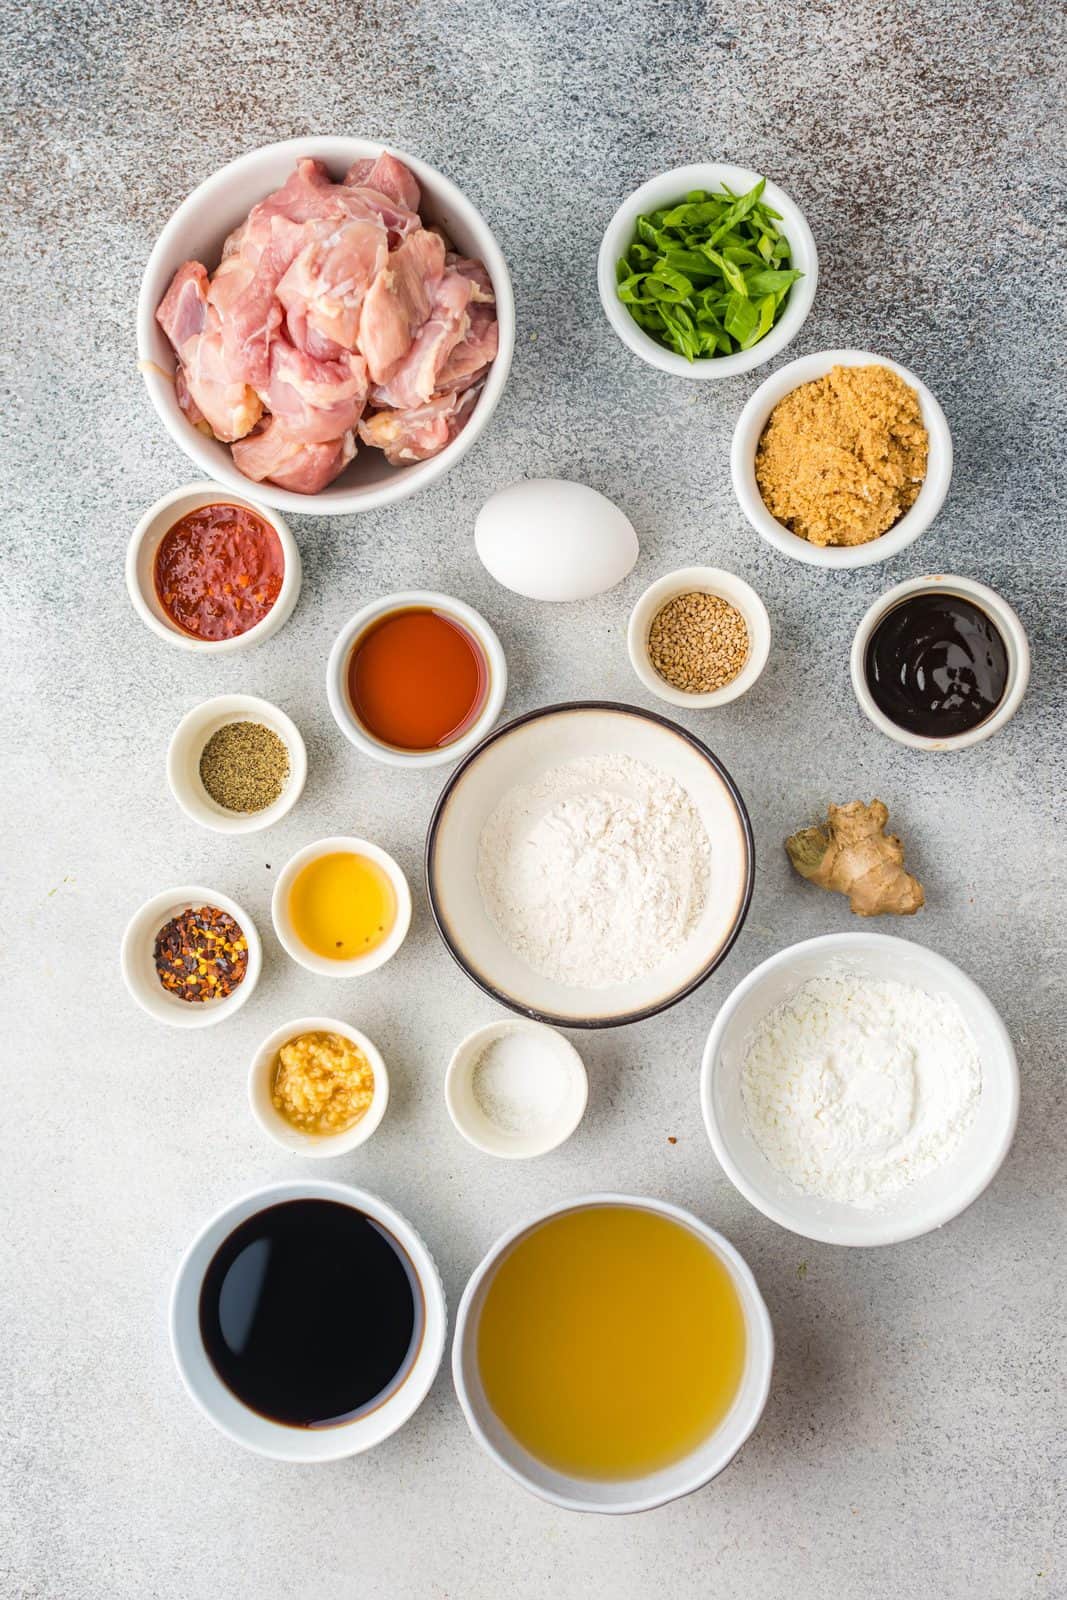 Ingredients needed: chicken thighs, cornstarch, all-purpose four, egg, salt, pepper, chicken broth, cornstarch, brown sugar, hoisin sauce, soy sauce, garlic, ginger, rice vinegar, toasted sesame oil, chili flakes, chili sauce, green onion and sesame seeds.